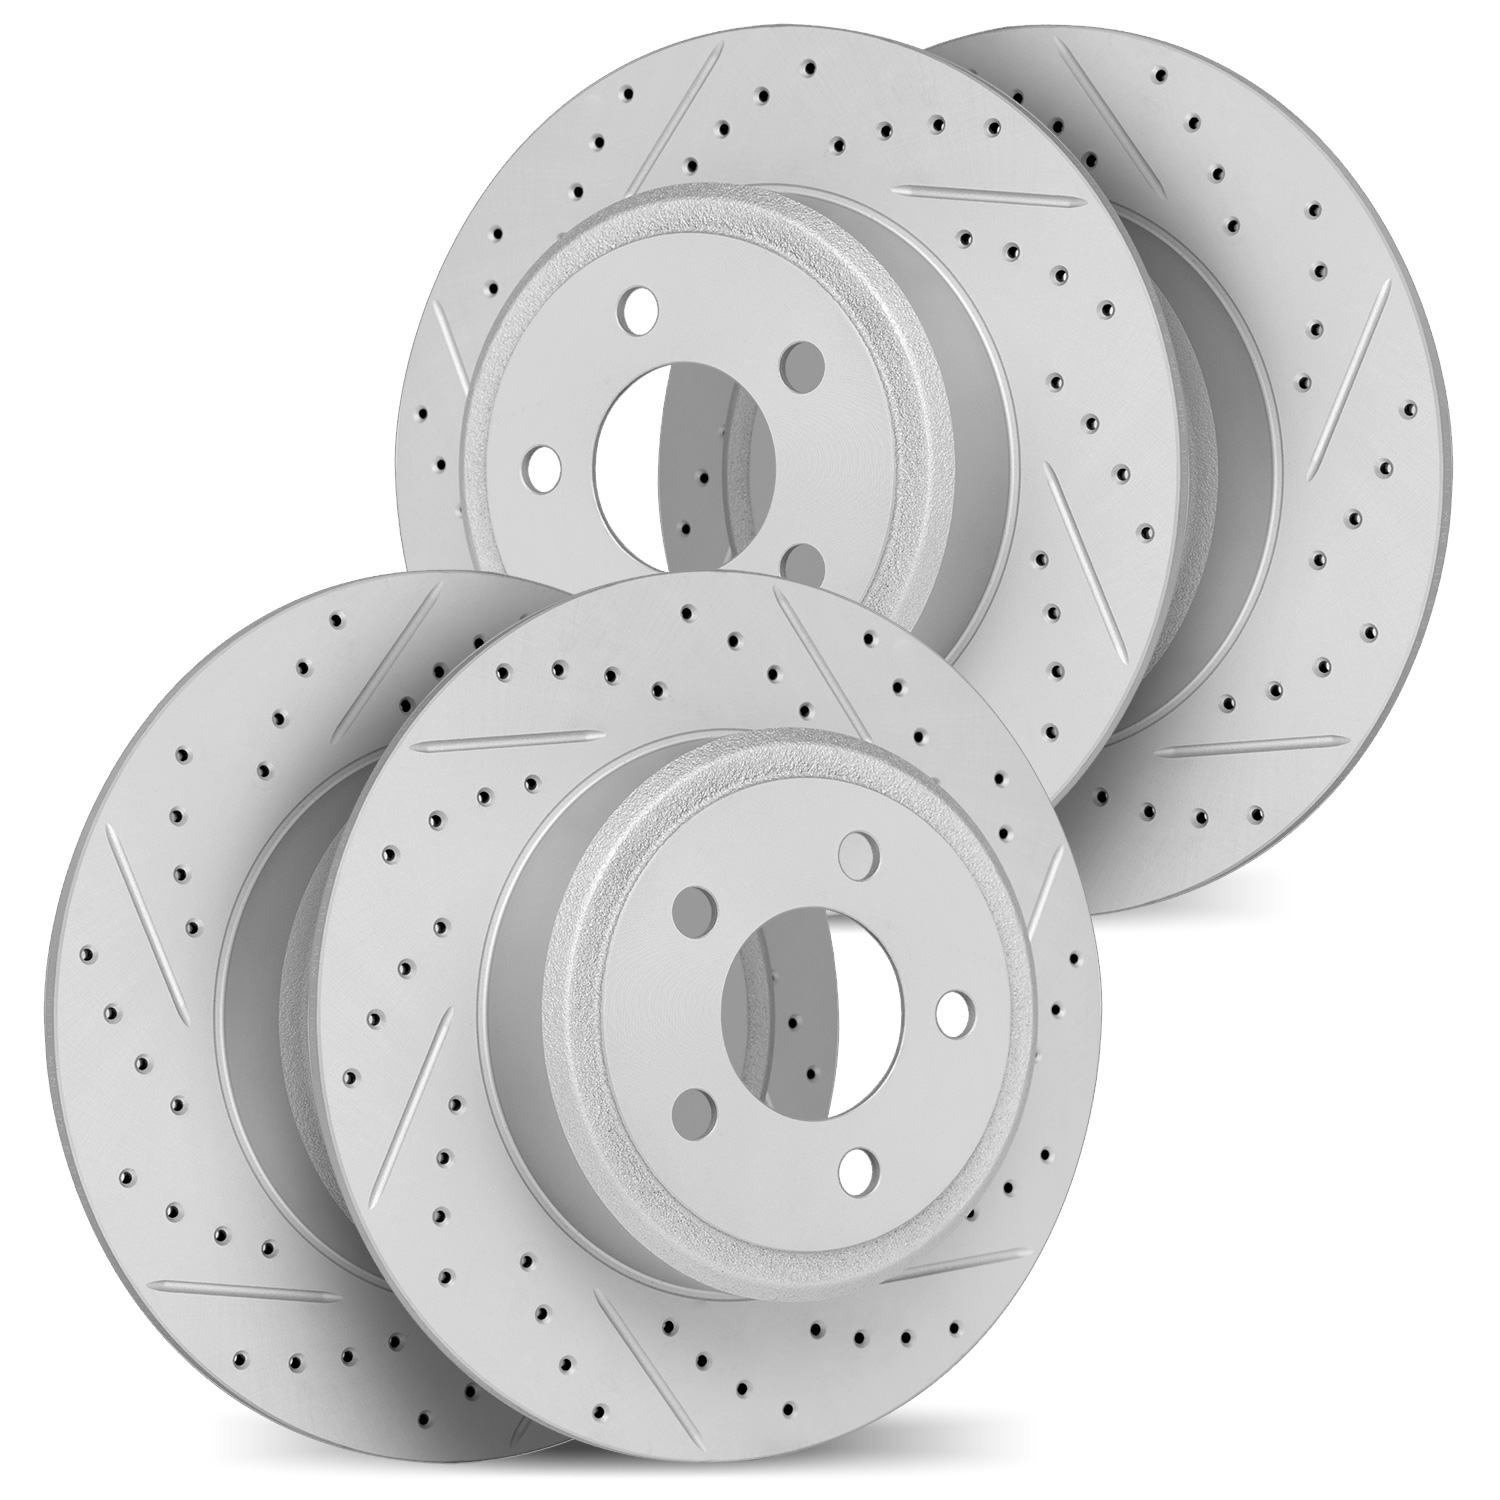 2004-31009 Geoperformance Drilled/Slotted Brake Rotors, 1995-1998 BMW, Position: Front and Rear